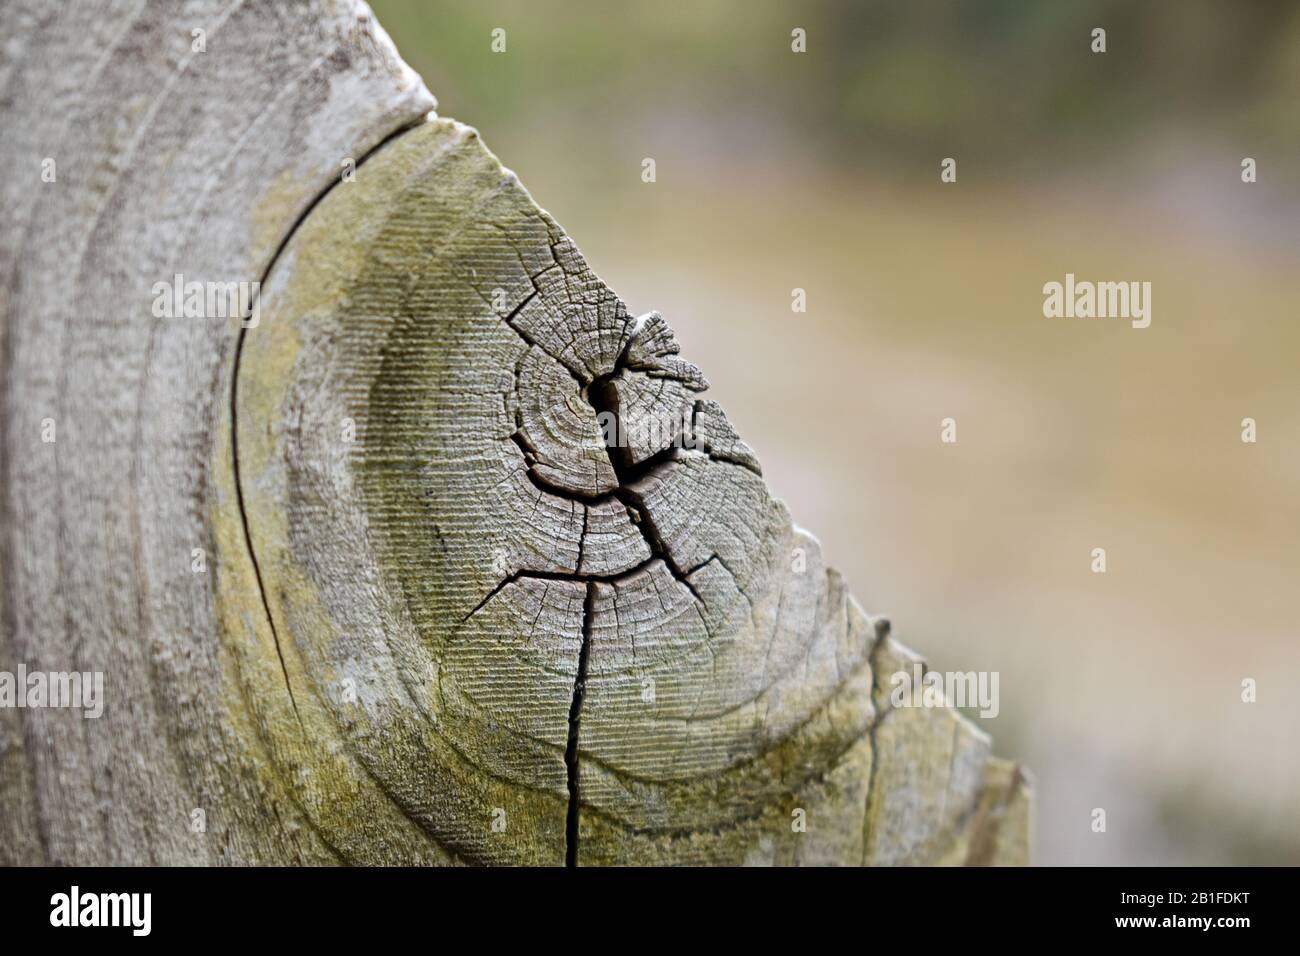 Detail of a wooden fence against blurry background Stock Photo